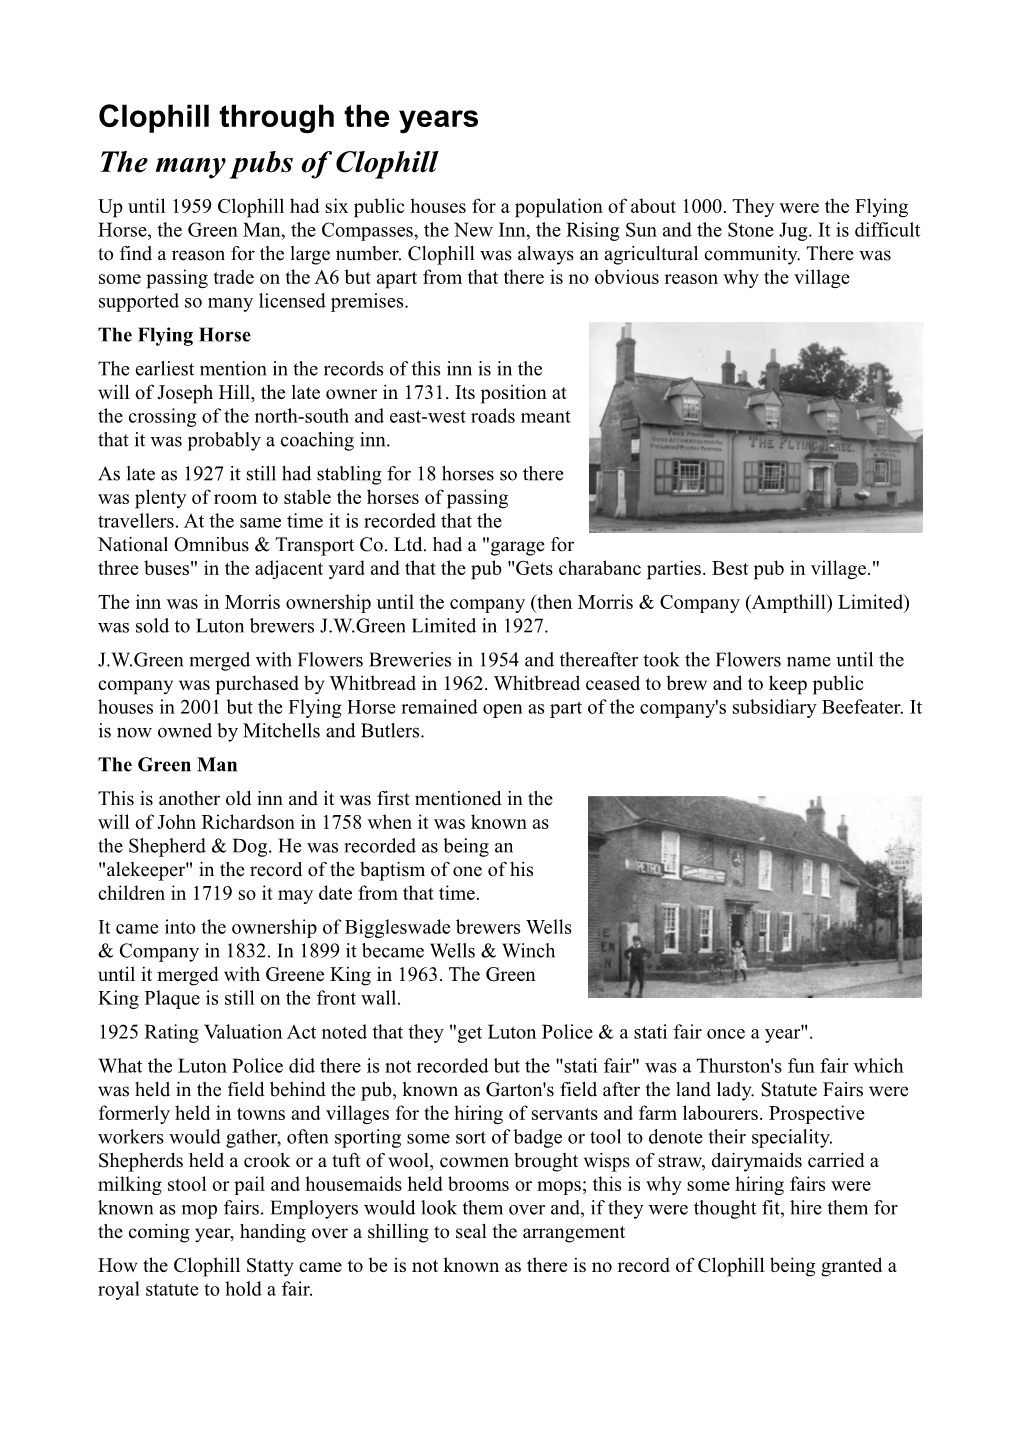 Clophill Through the Years the Many Pubs of Clophill up Until 1959 Clophill Had Six Public Houses for a Population of About 1000